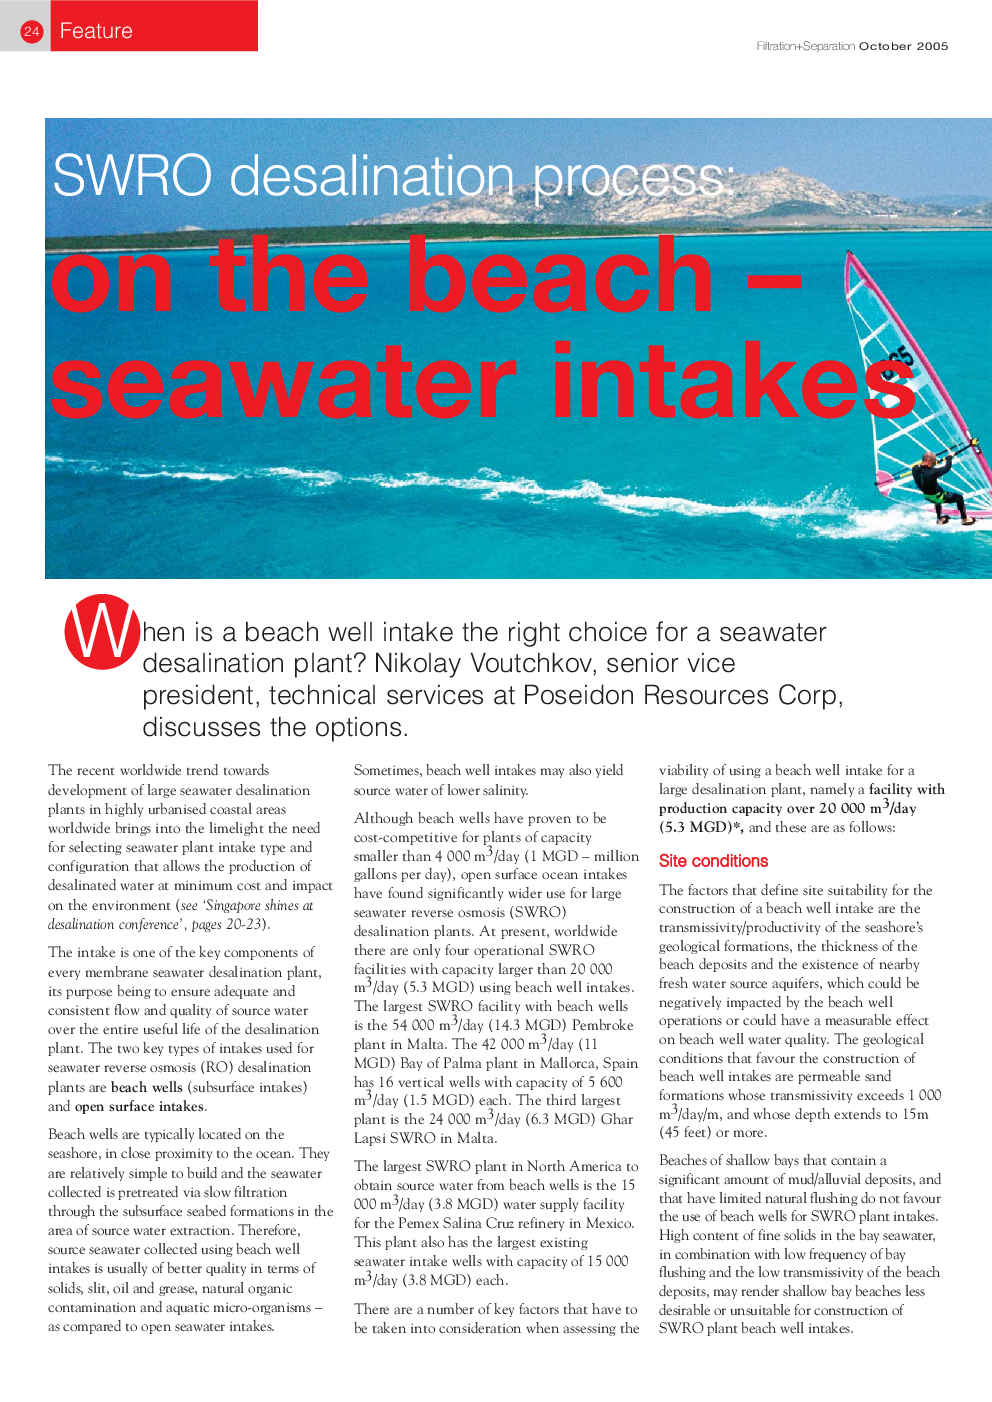 SWRO desalination process: on the beach - seawater intakes